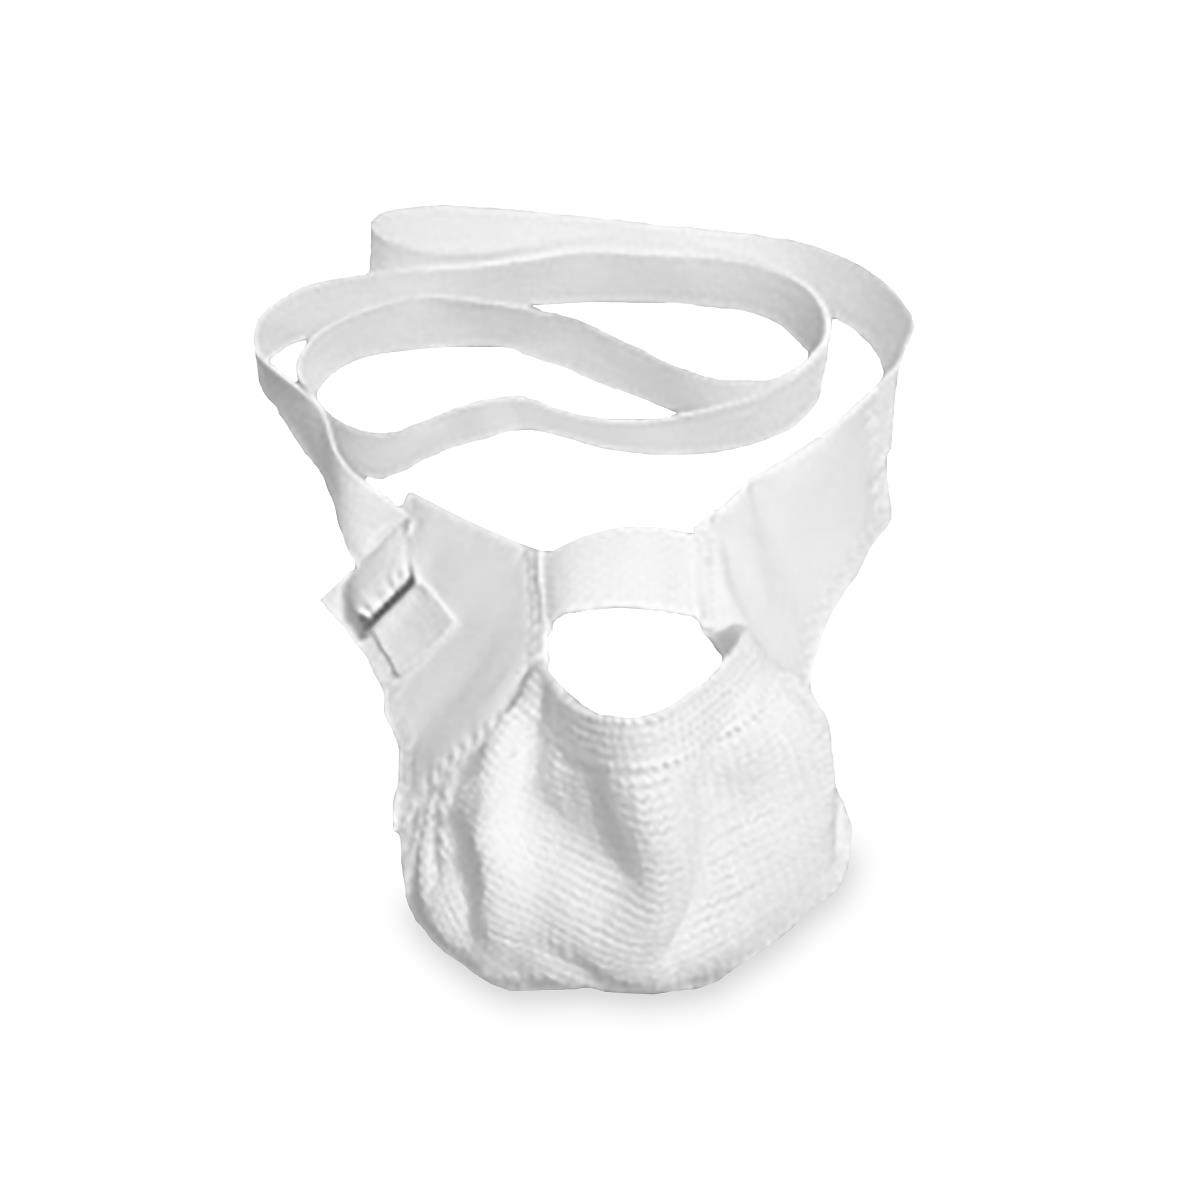 Buy SUSPENSORY BANDAGE (XL) online at best discount in India